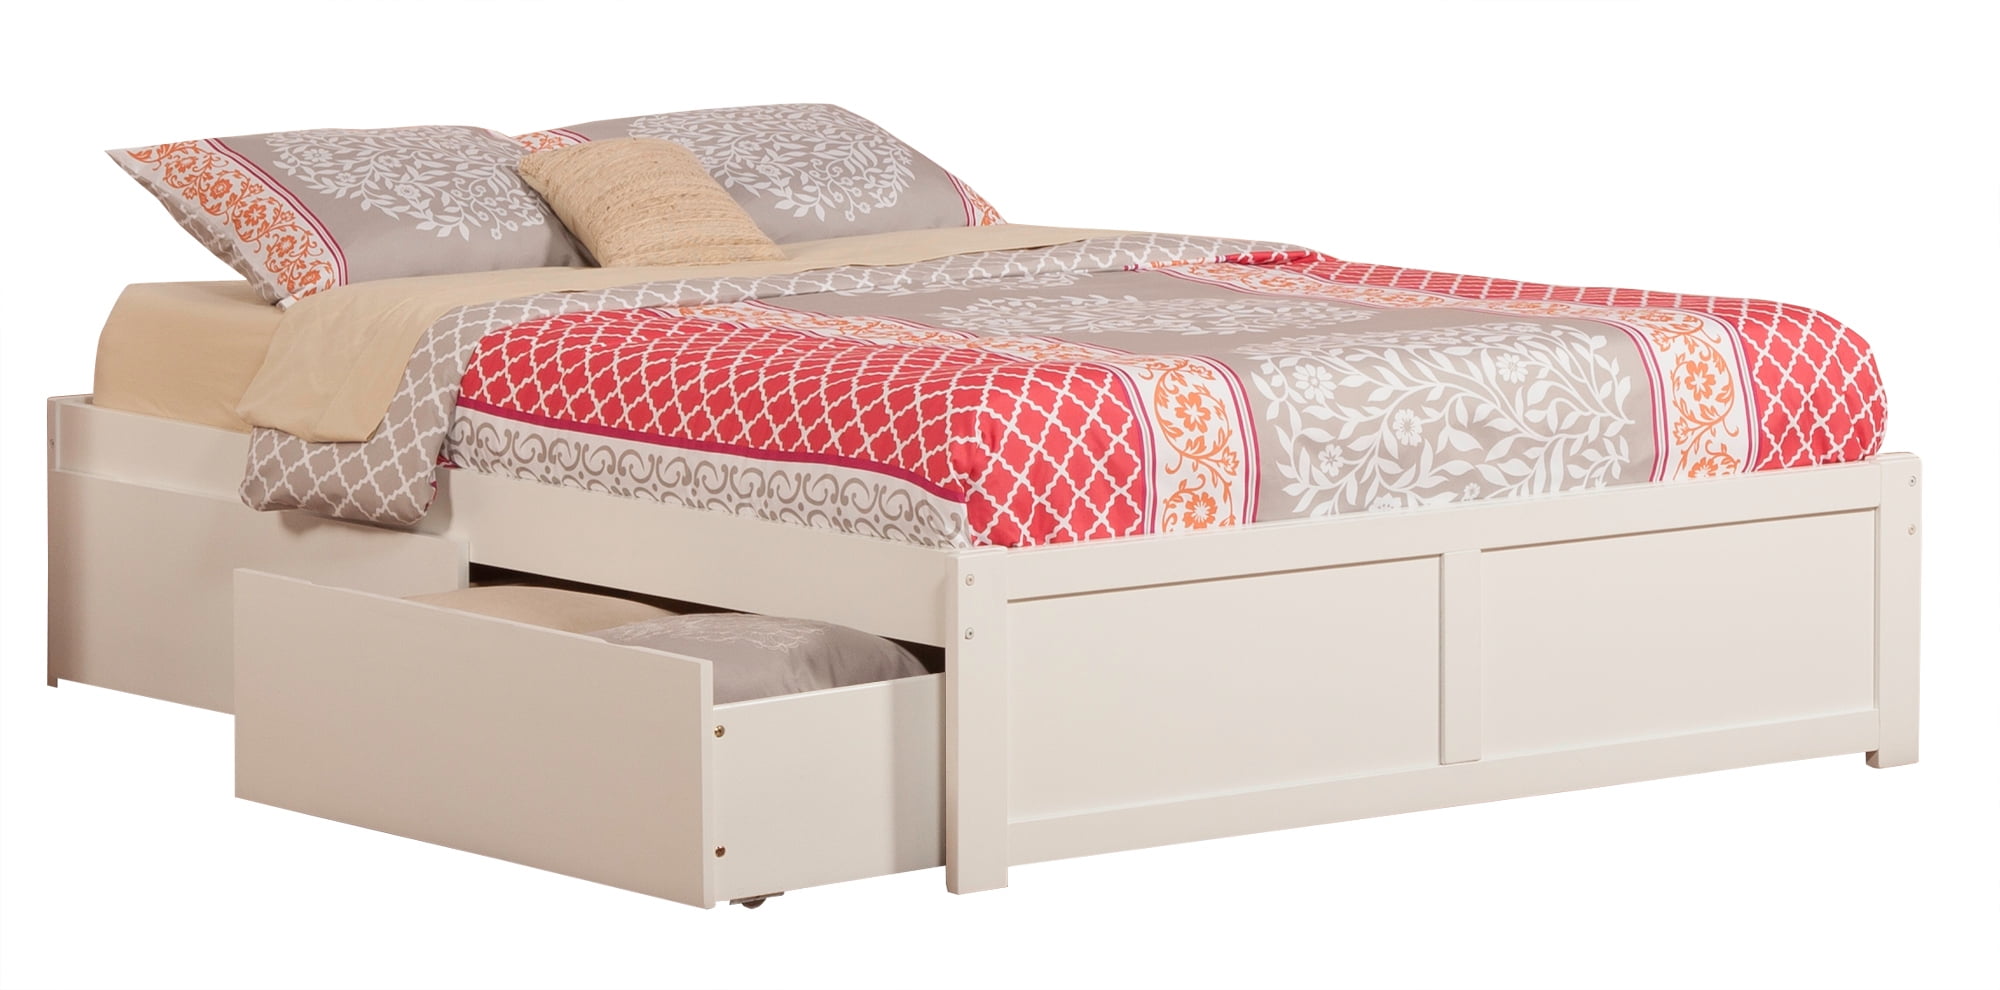 Ar8052112 Concord Flat Panel Foot Board With Urban Bed Drawers, White - King